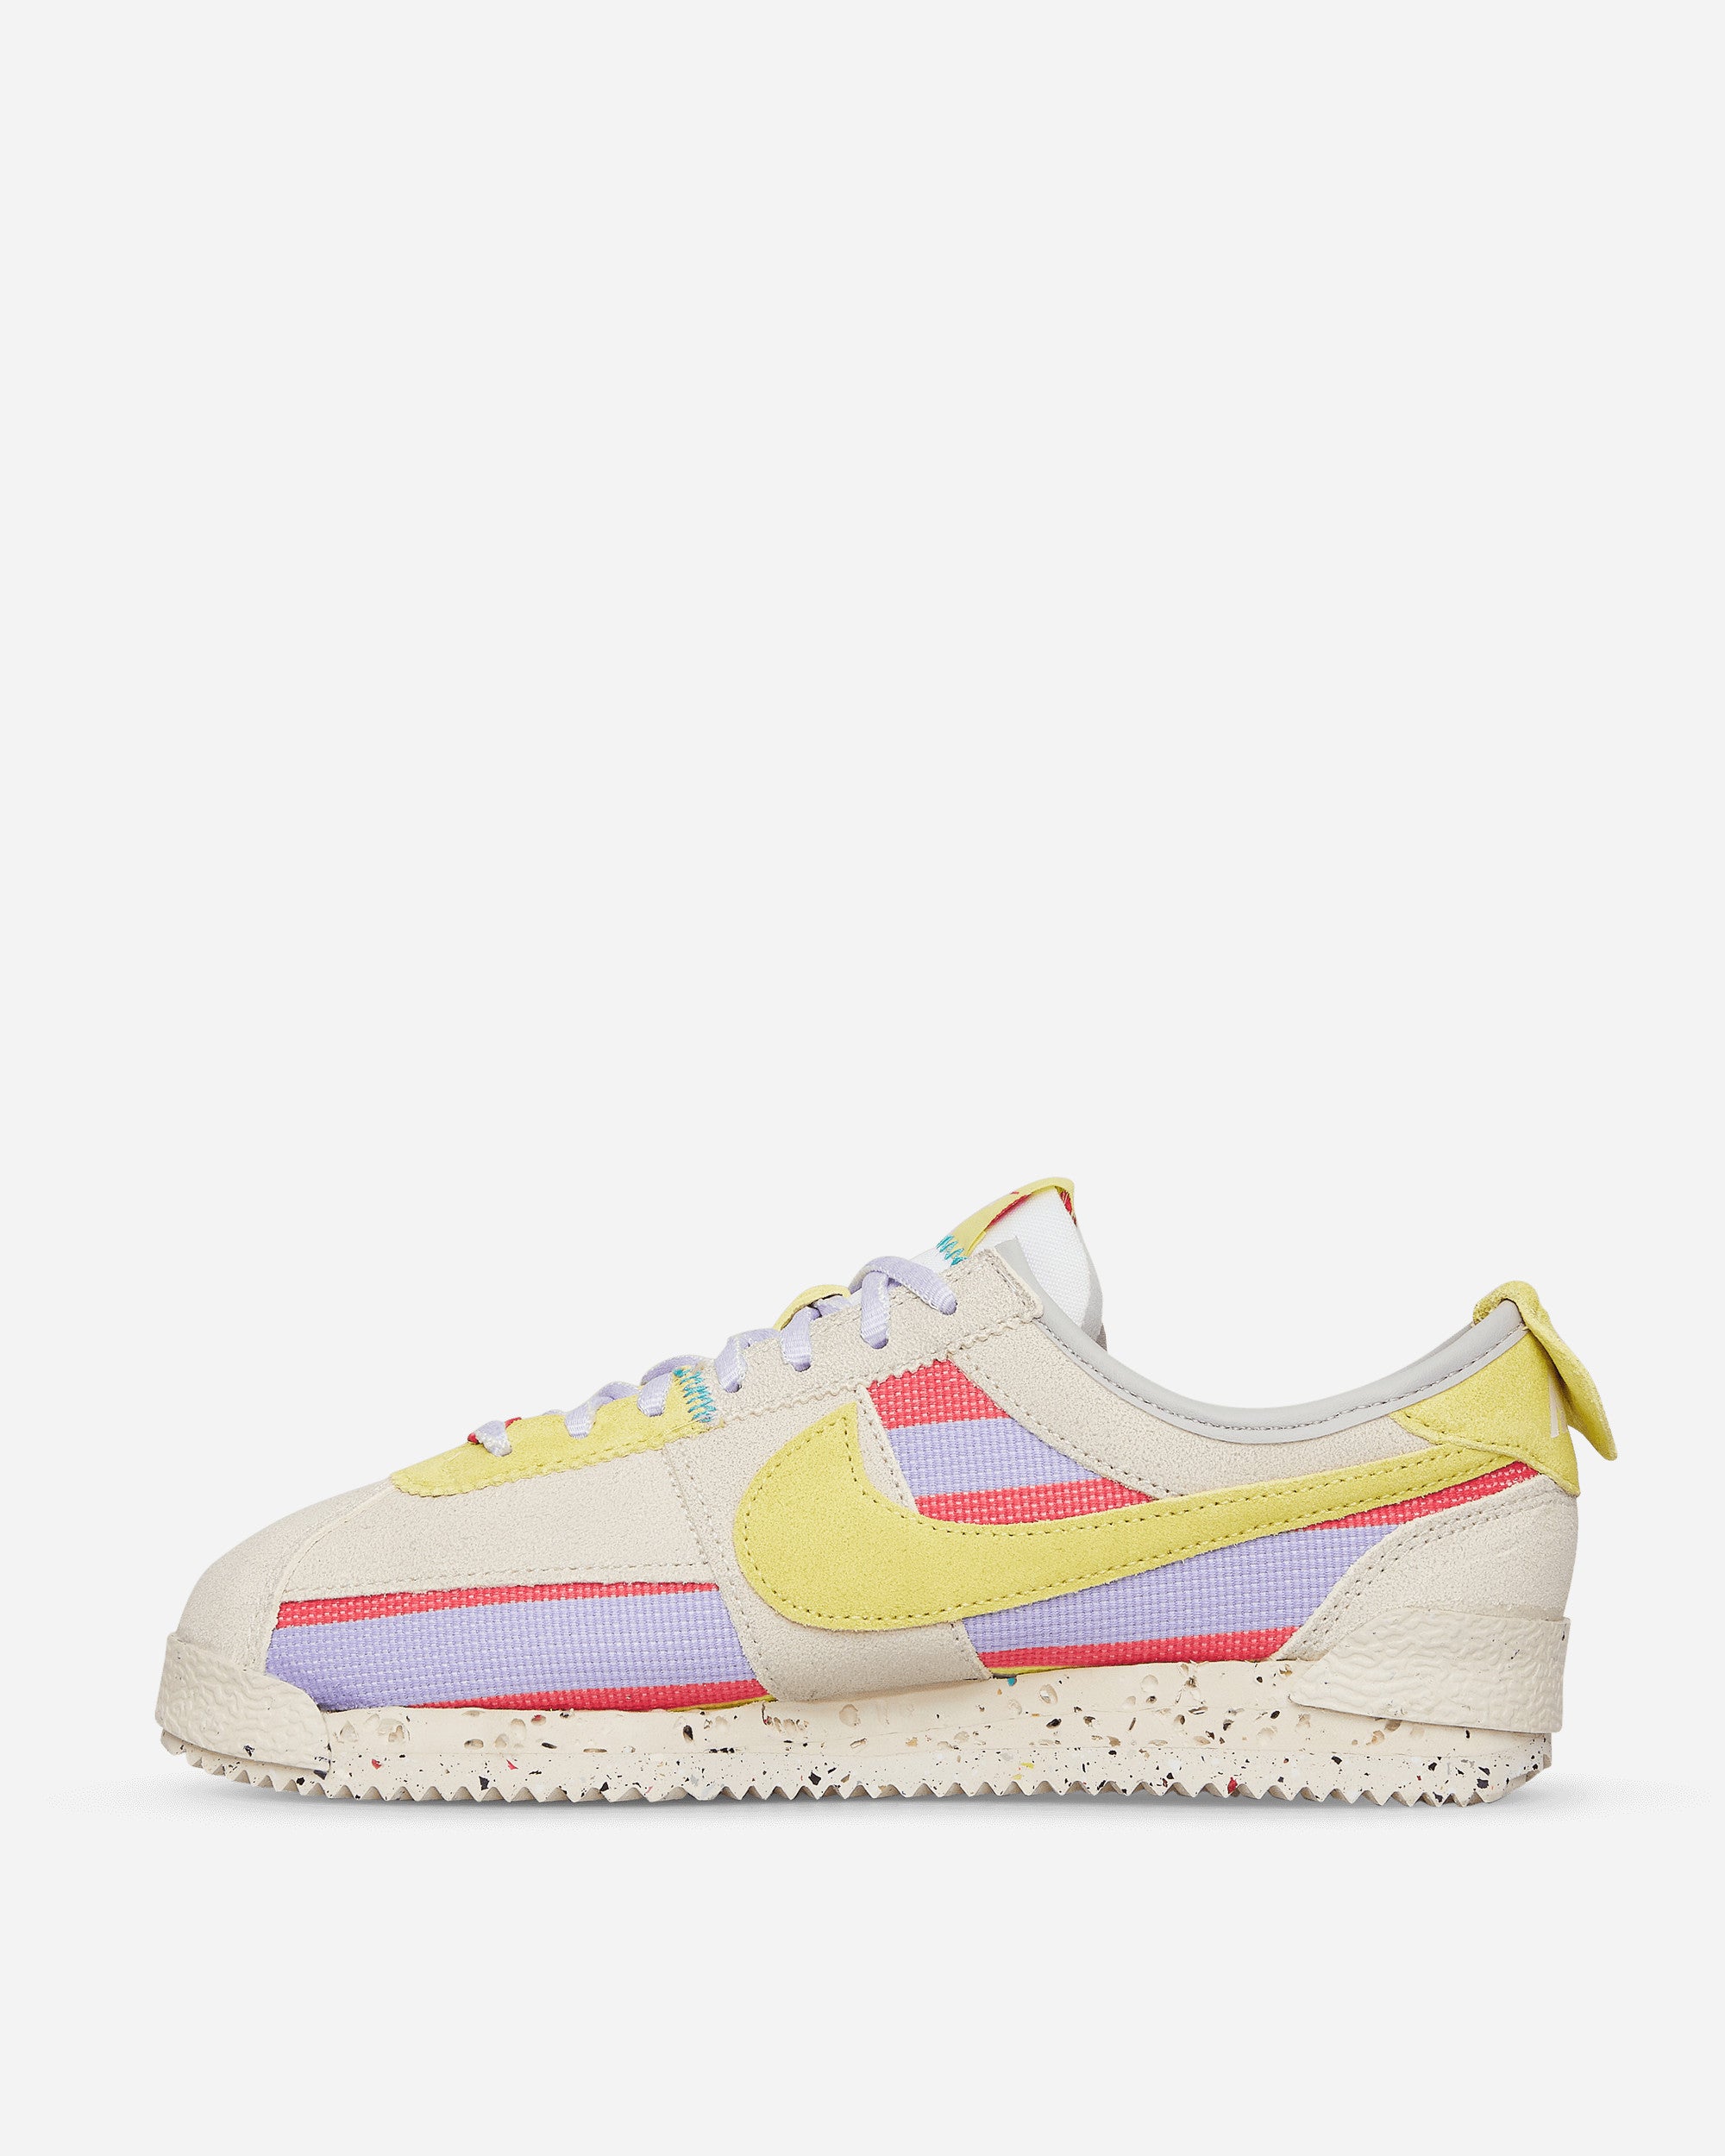 Nike Special Project Cortez Sp White/Lemon Frost Sneakers Low DR1413-100